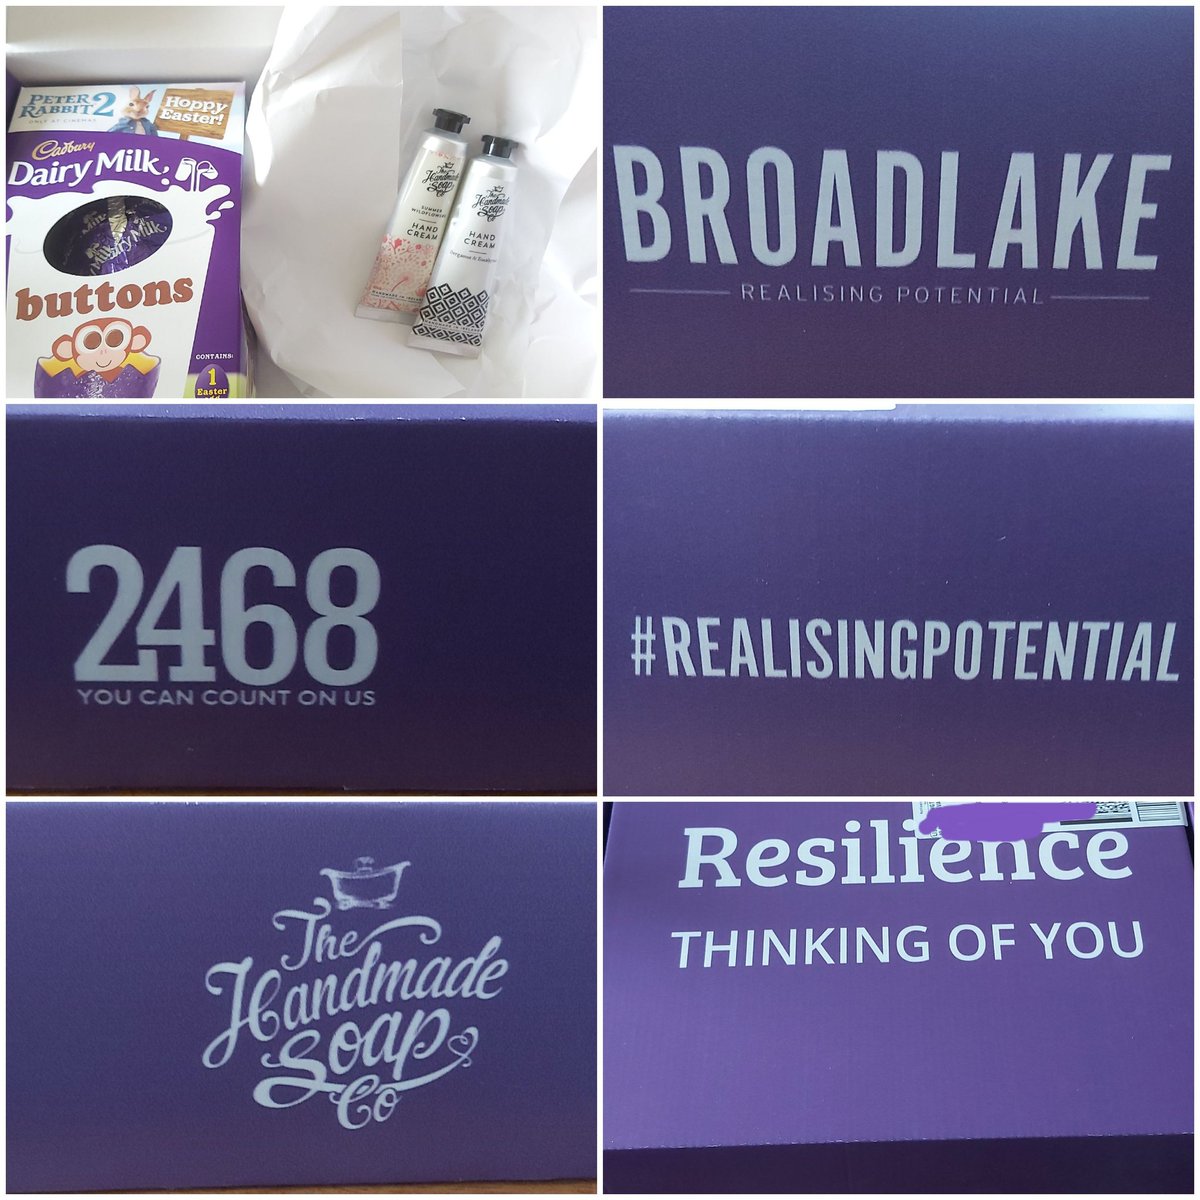 Lovely surprise arrived today!! Thank you @Resilience_ie Easter egg to be eaten immediately 🙈  fantastic hand cream which smells divine 😍 @wearebroadlake @thehandmadesoap @2468Group 
#realisingpotential #resiliencenurses